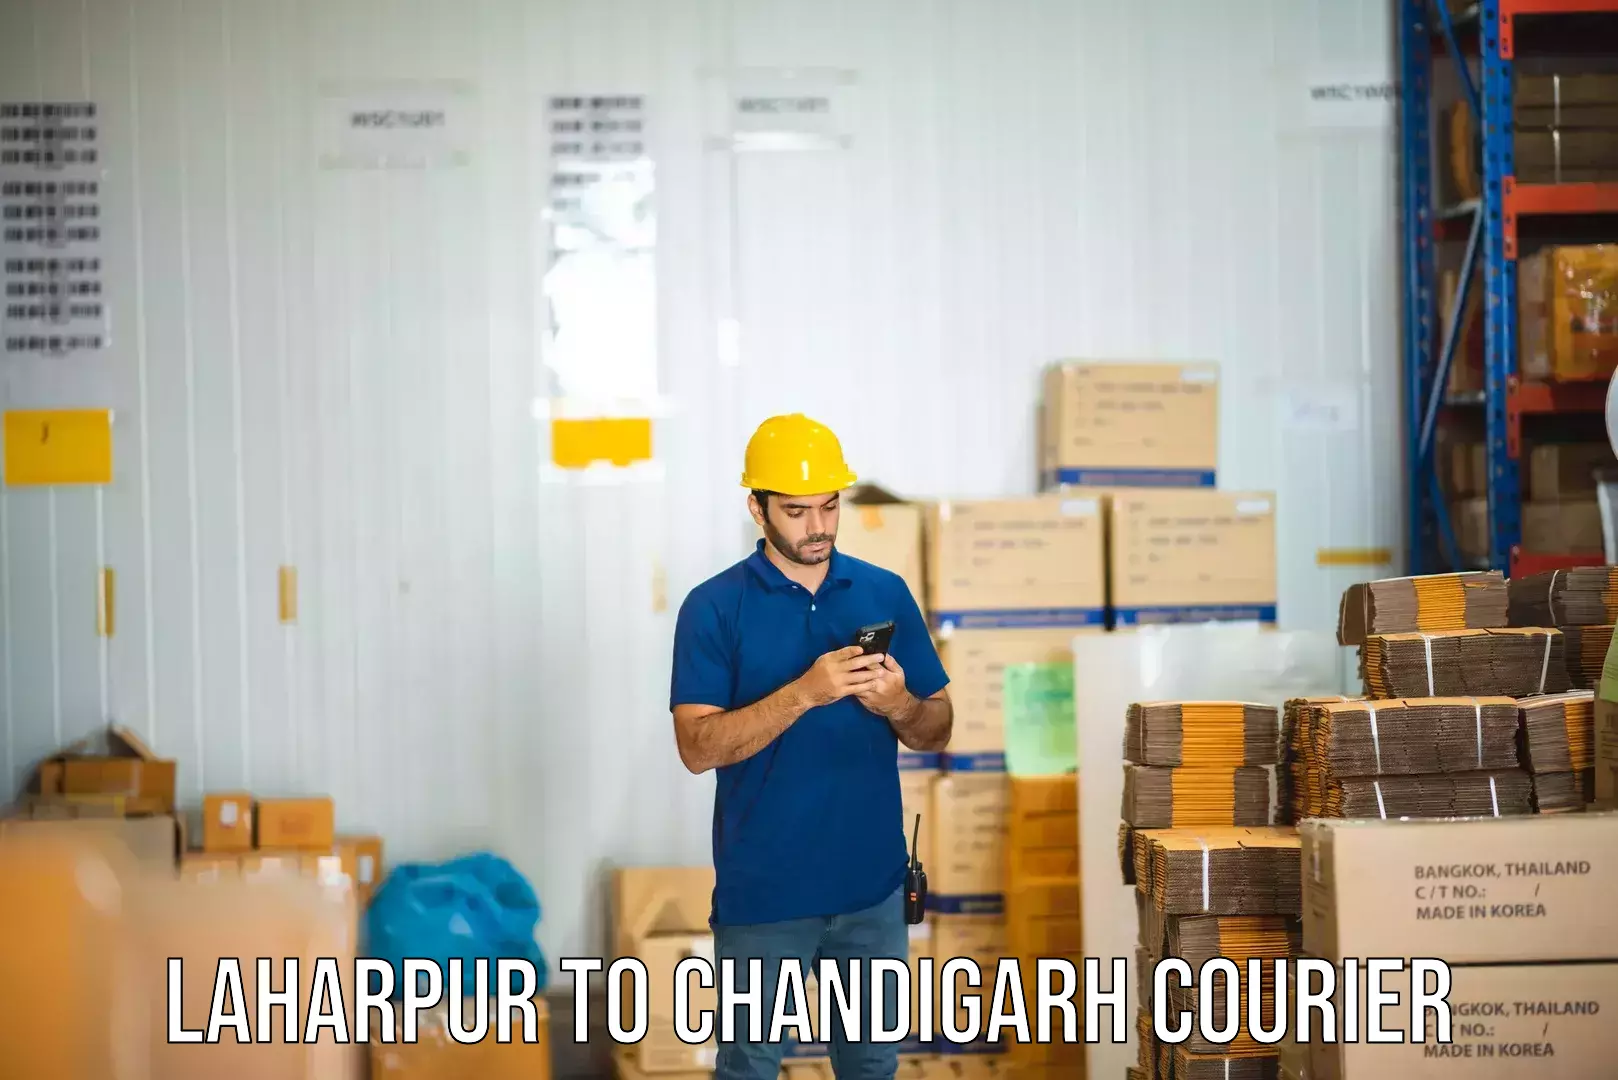 Efficient parcel delivery Laharpur to Chandigarh